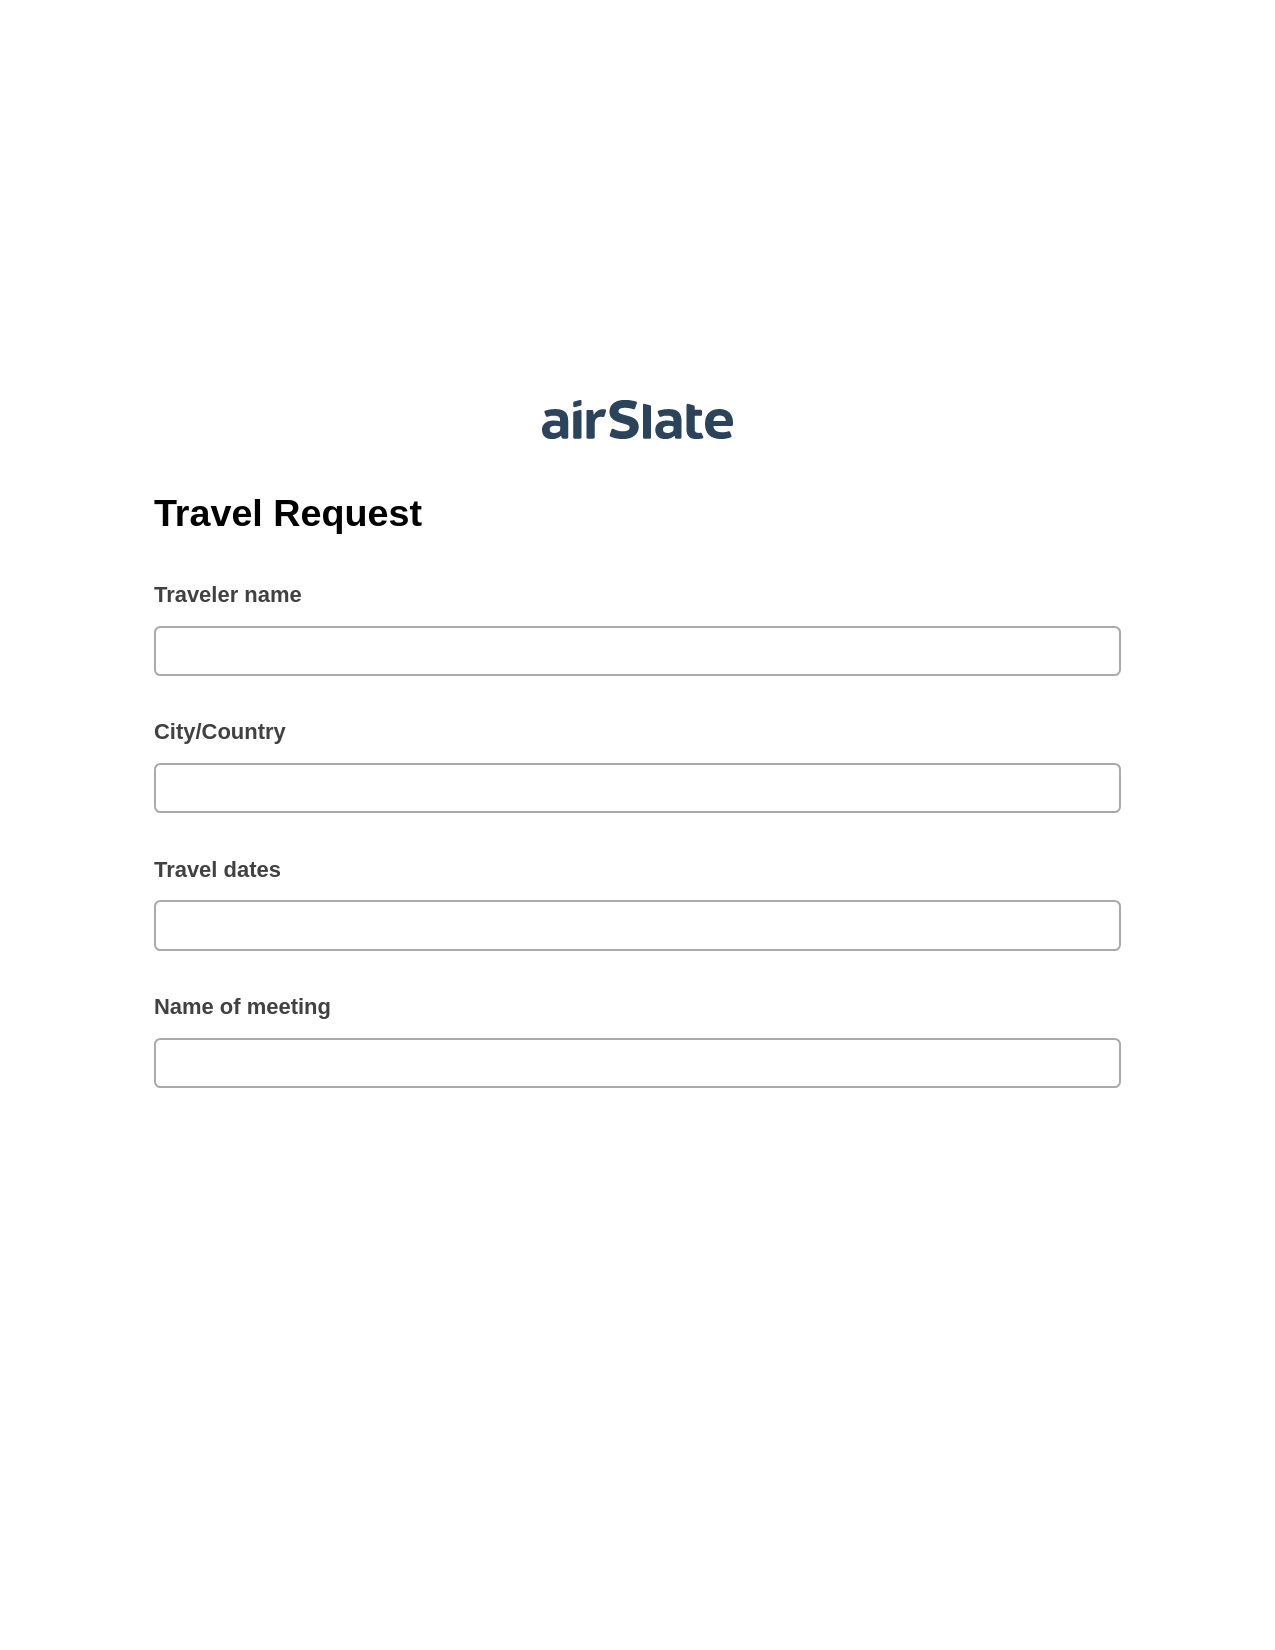 Travel Request Pre-fill Document Bot, Create MS Dynamics 365 Records Bot, Export to Smartsheet